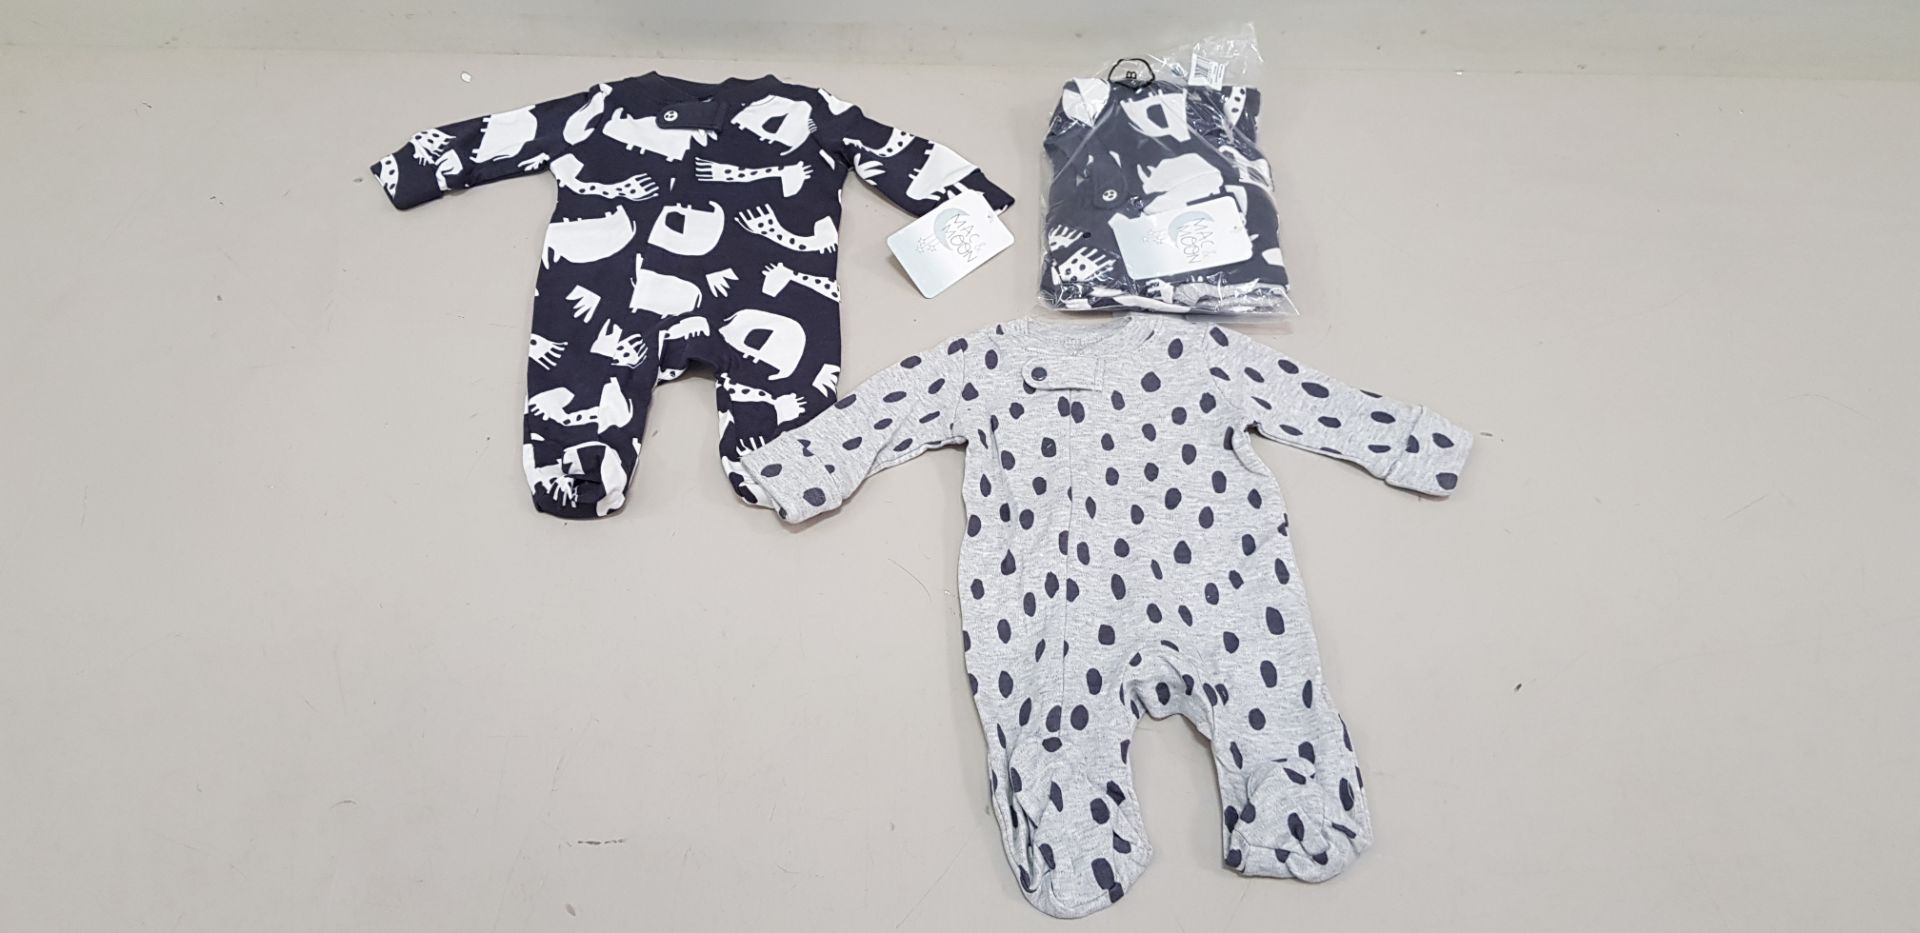 25 X BRAND NEW MAC AND MOON 2 PACK OF BABY GROWS UK SIZE 6 MONTHS